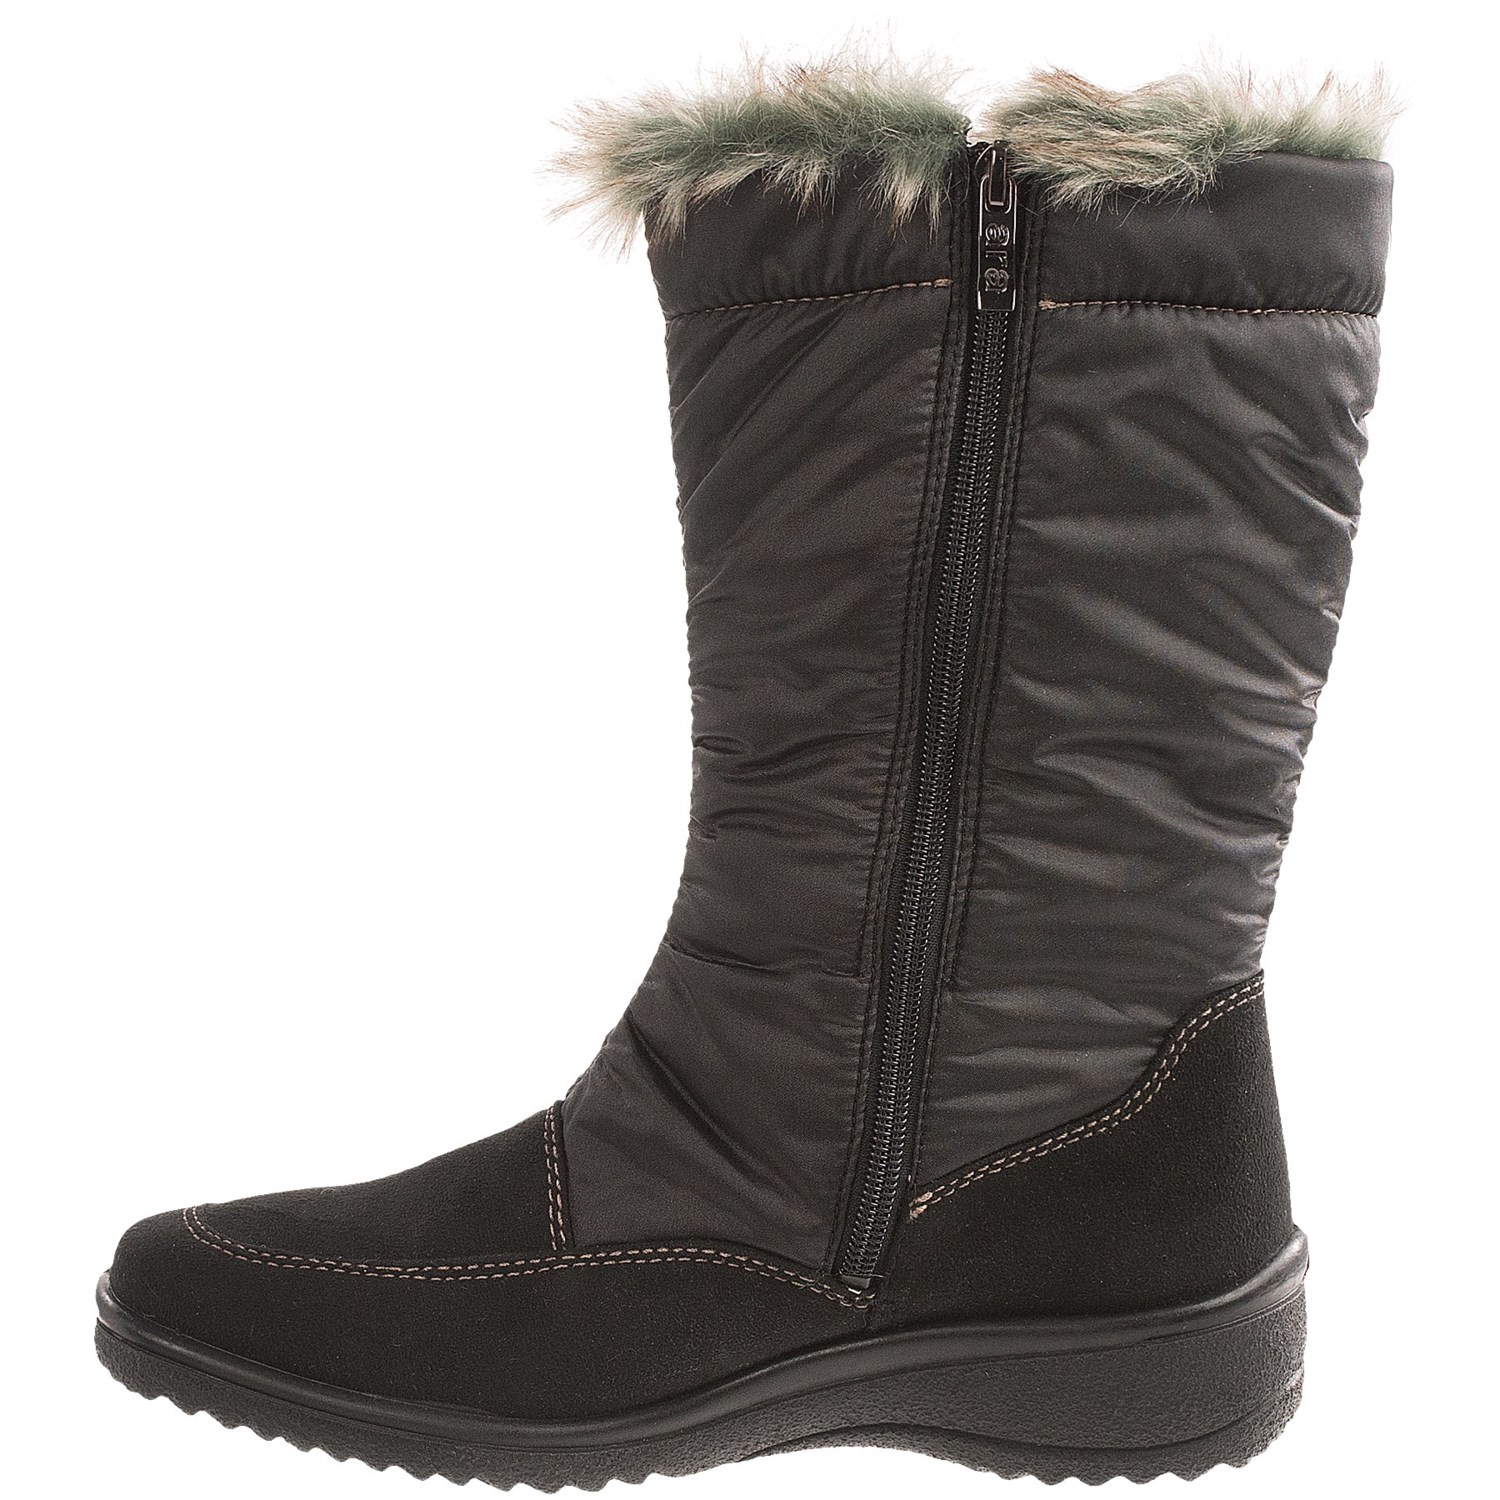 Womens Waterproof Snow Boots Clearance - Cr Boot